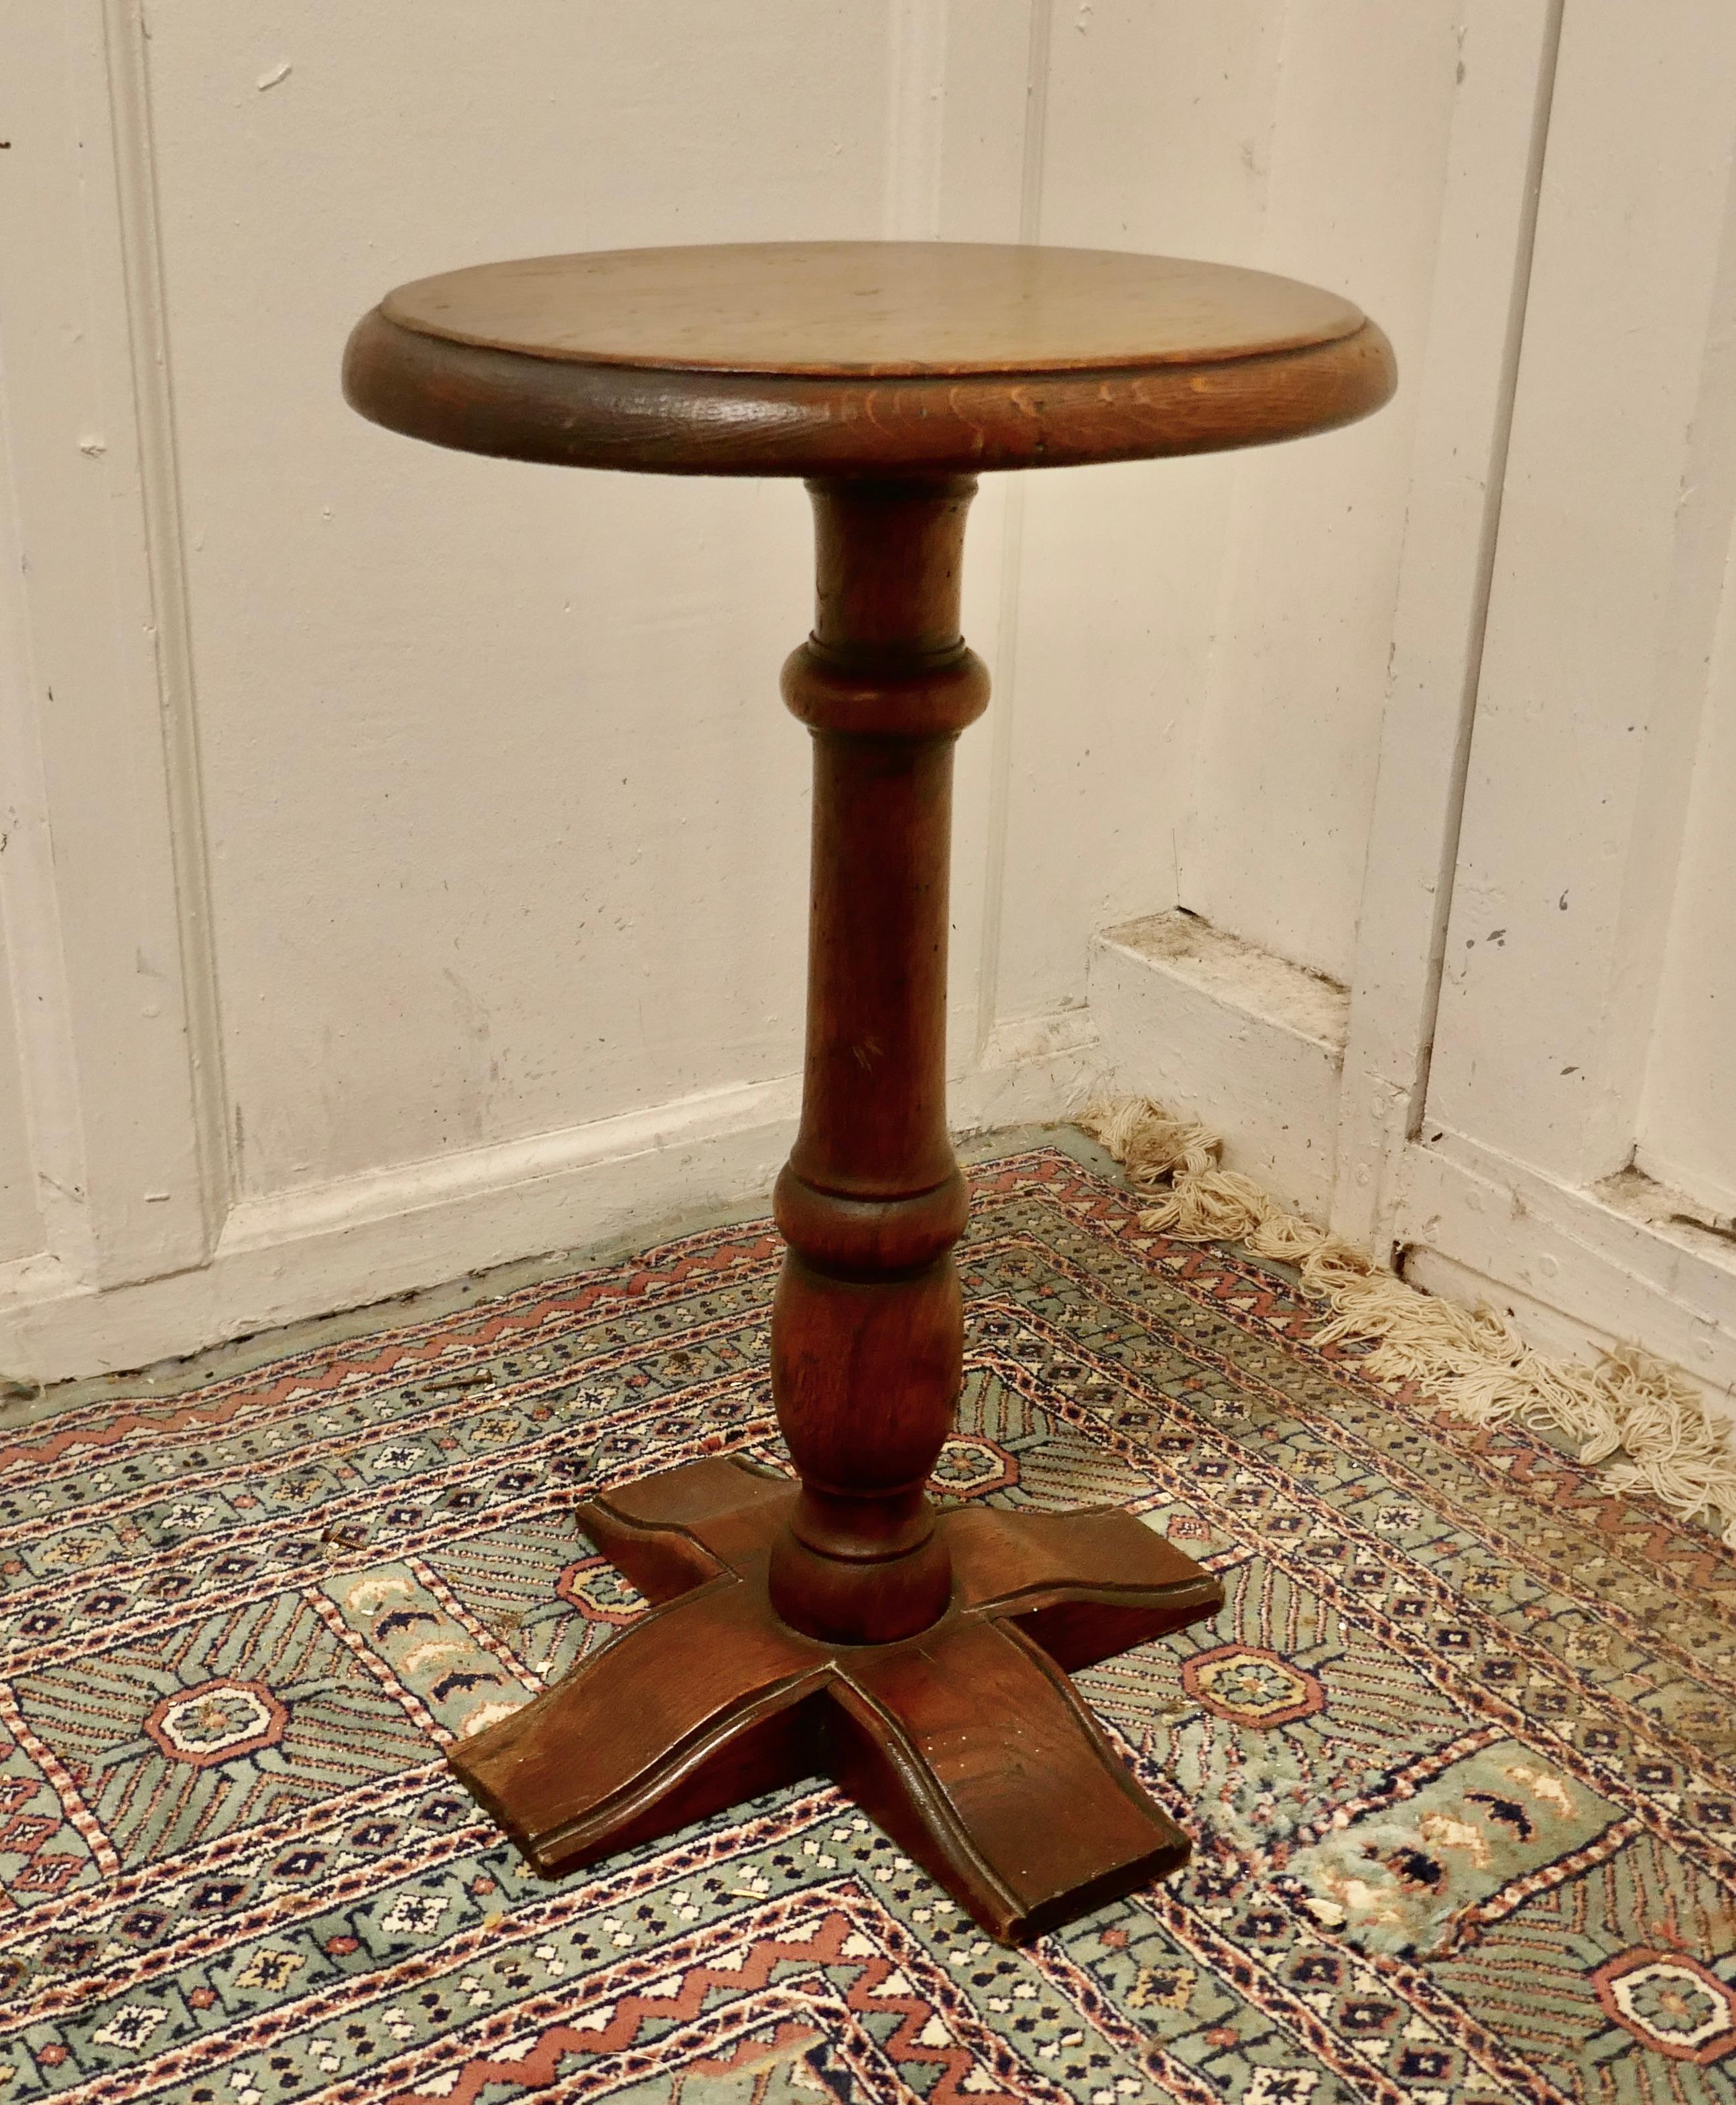 Country oak wine table or occasional table

This lovely little table stands on an attractive X footed base and has a attractive turned leg 
The 1” thick solid top is unusually an oval shape
The table is in good condition for its age
The table